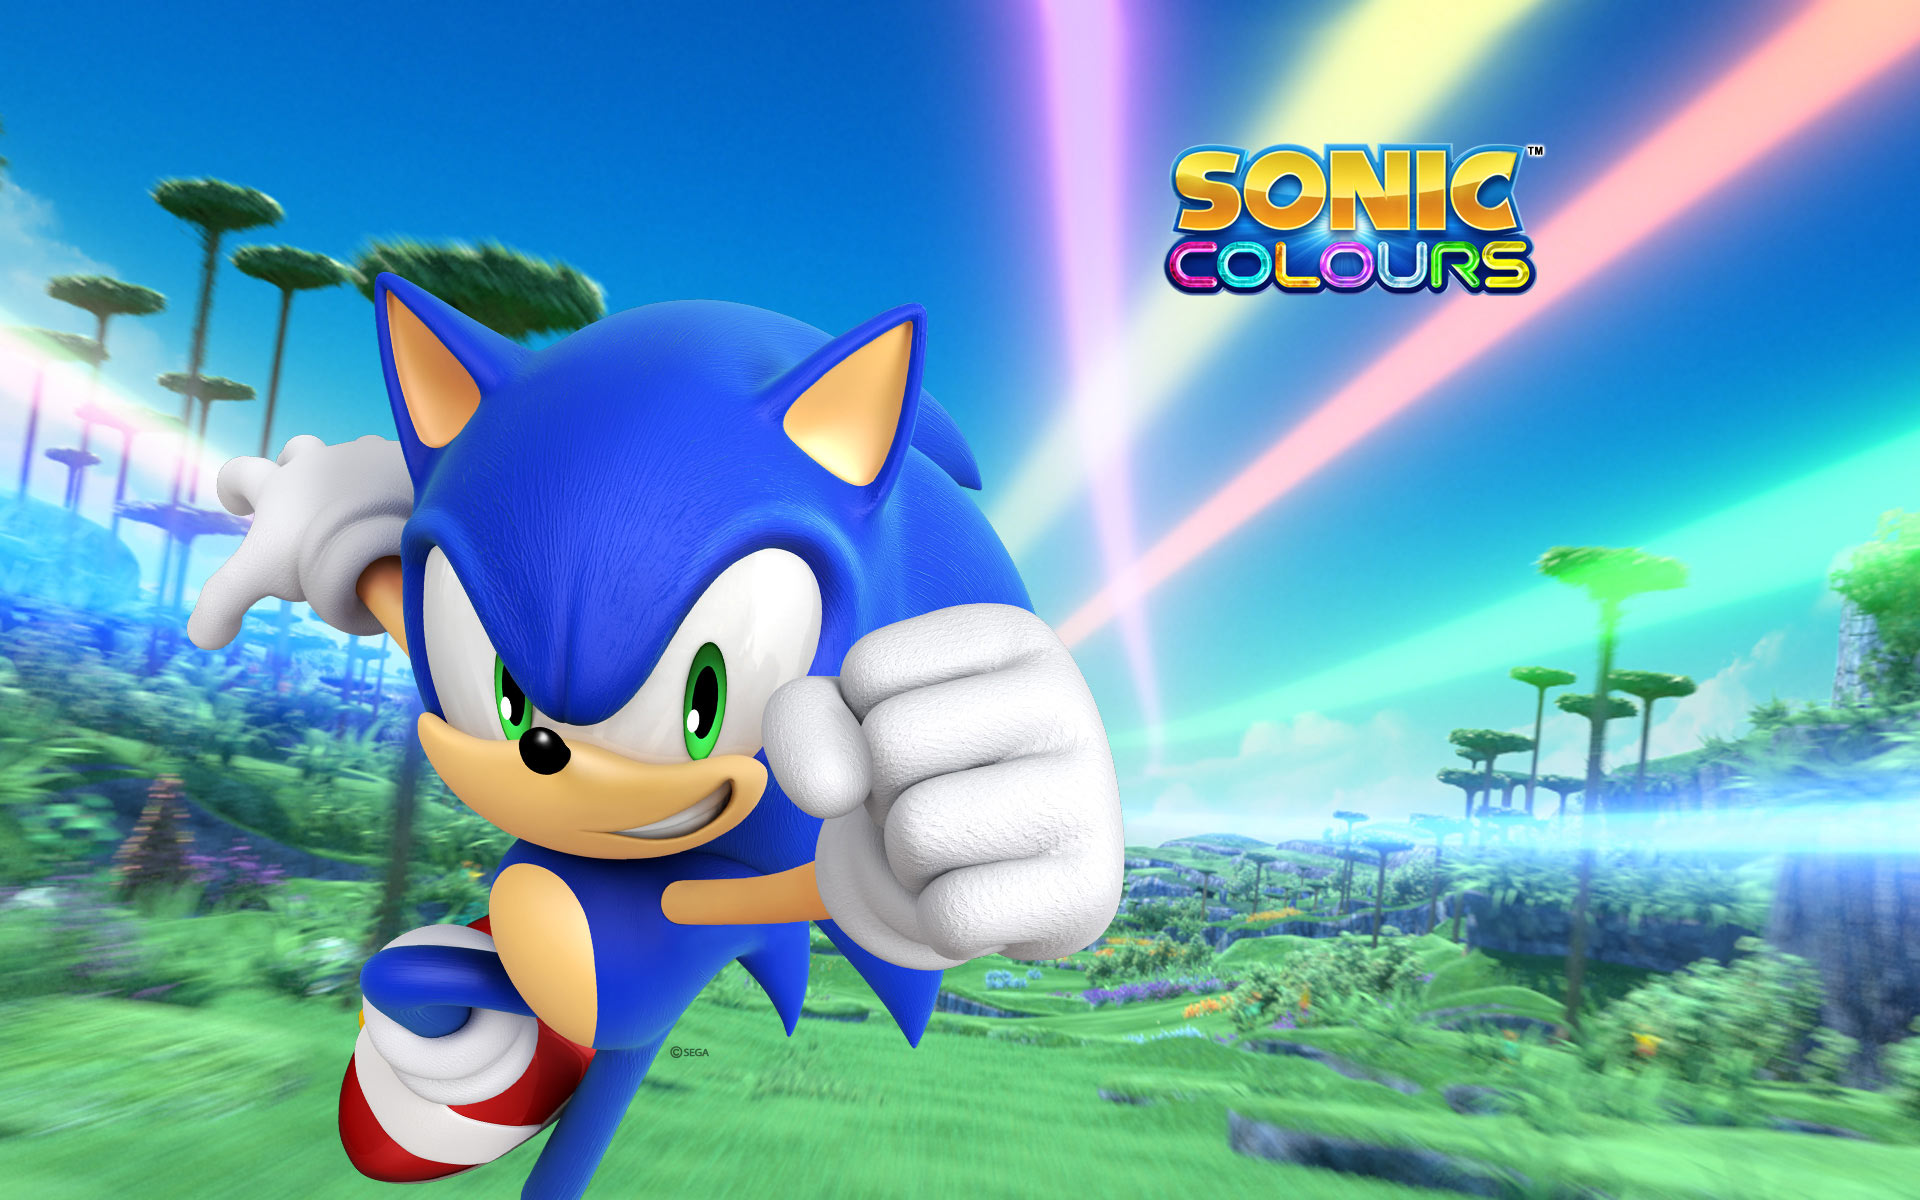 Wallpaper For Sonic Colours Click The Below Image To